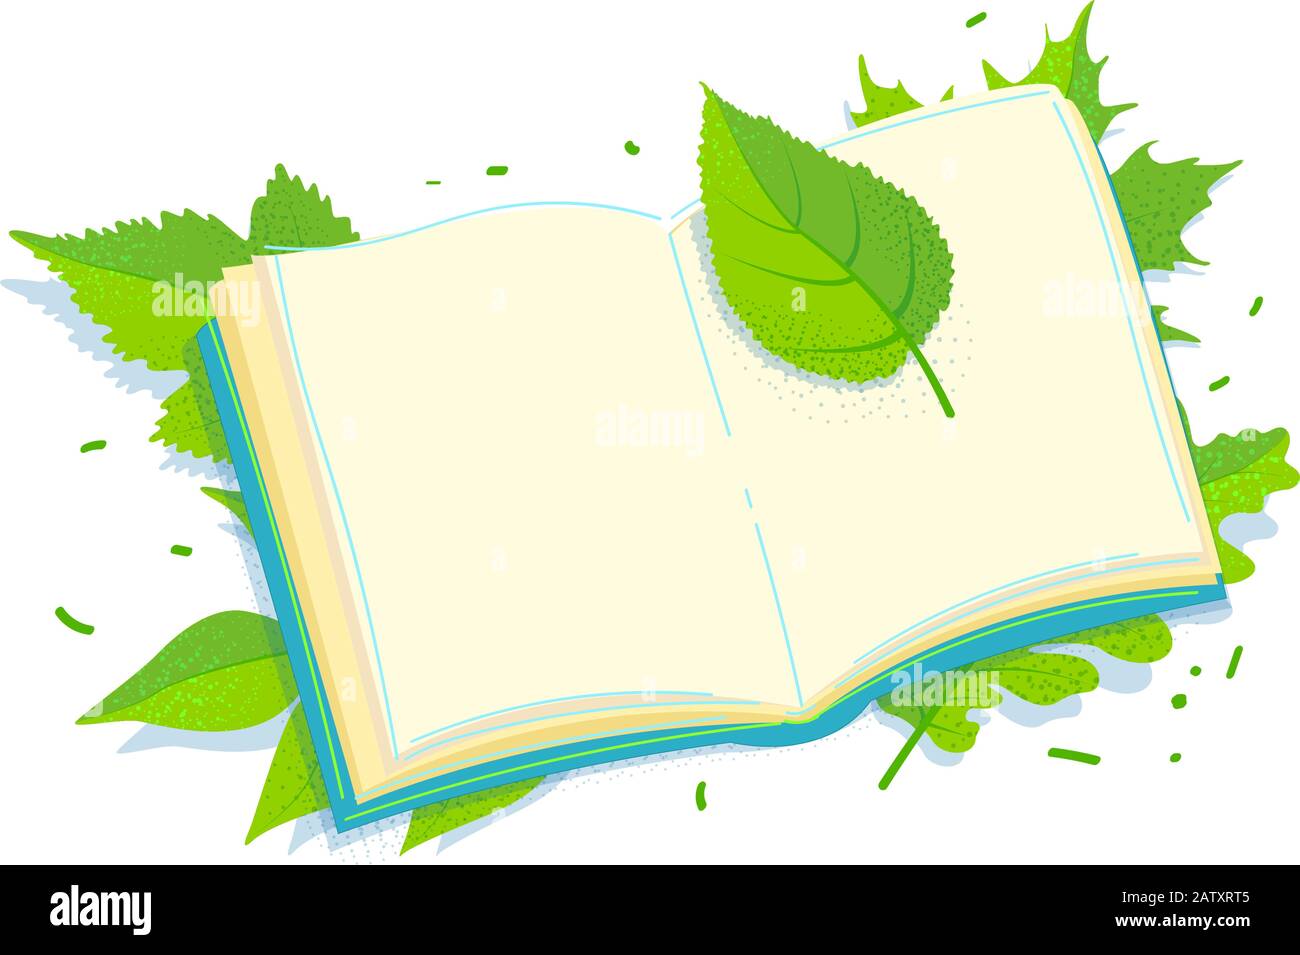 Open book in green leaves in flat style. Decorative vector template frame. Stock Spring concept layout page. Summer sheet illustration. Copy space nature creative element isolated on white background. Stock Vector